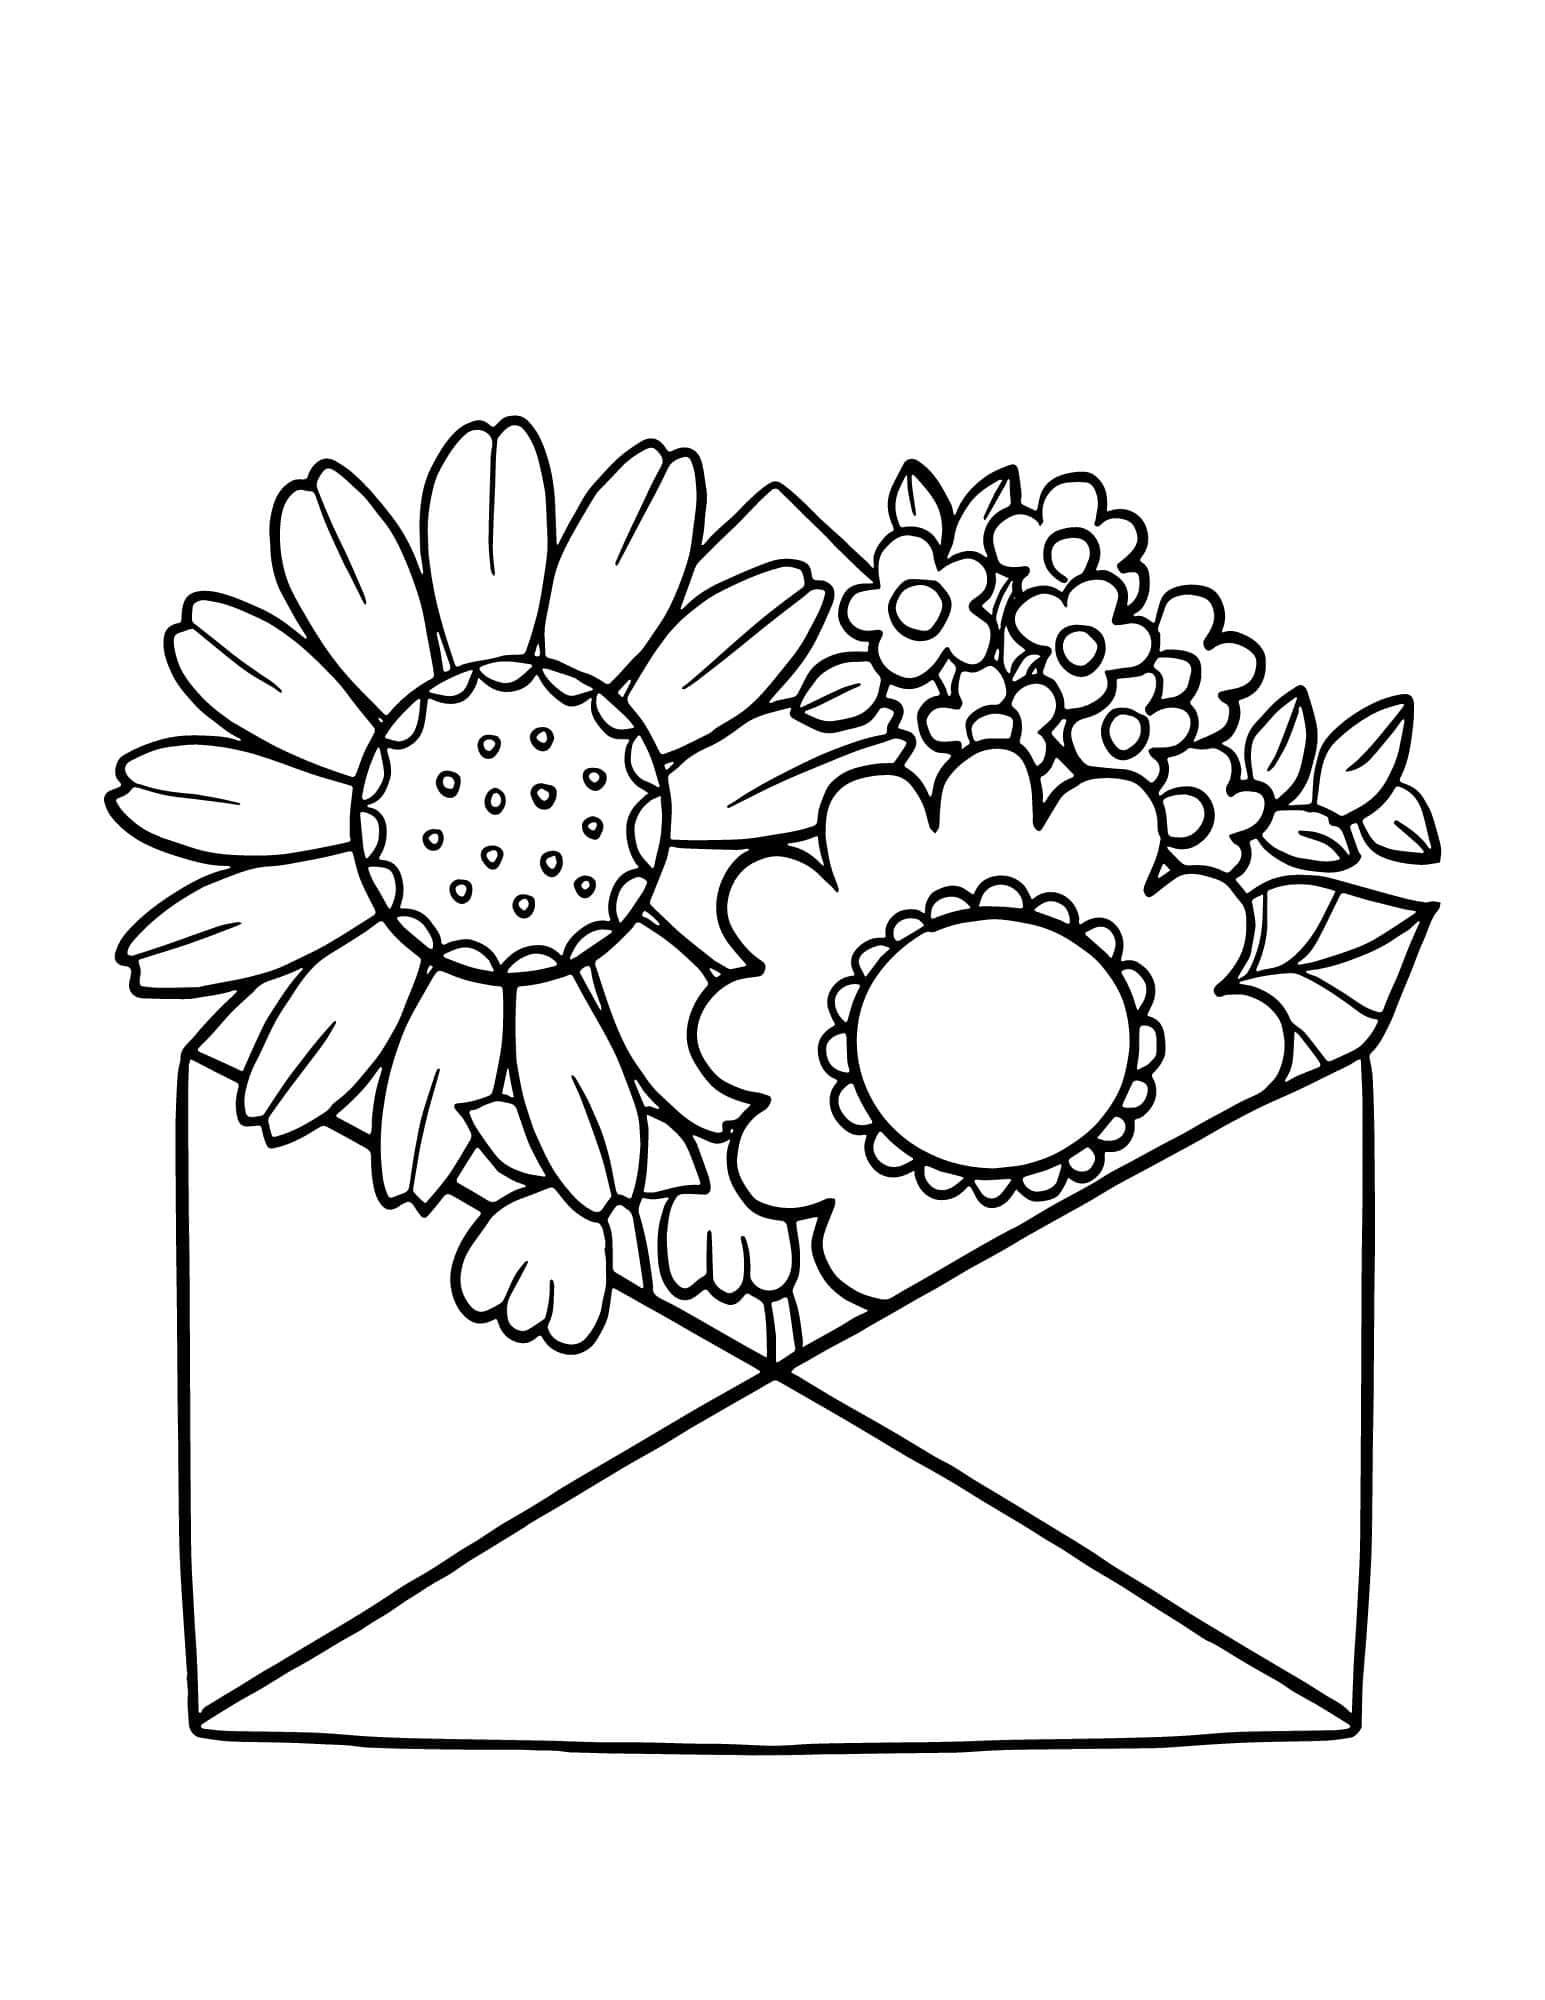 160+ Coloring Page Flowers: Blossom Your Imagination 45